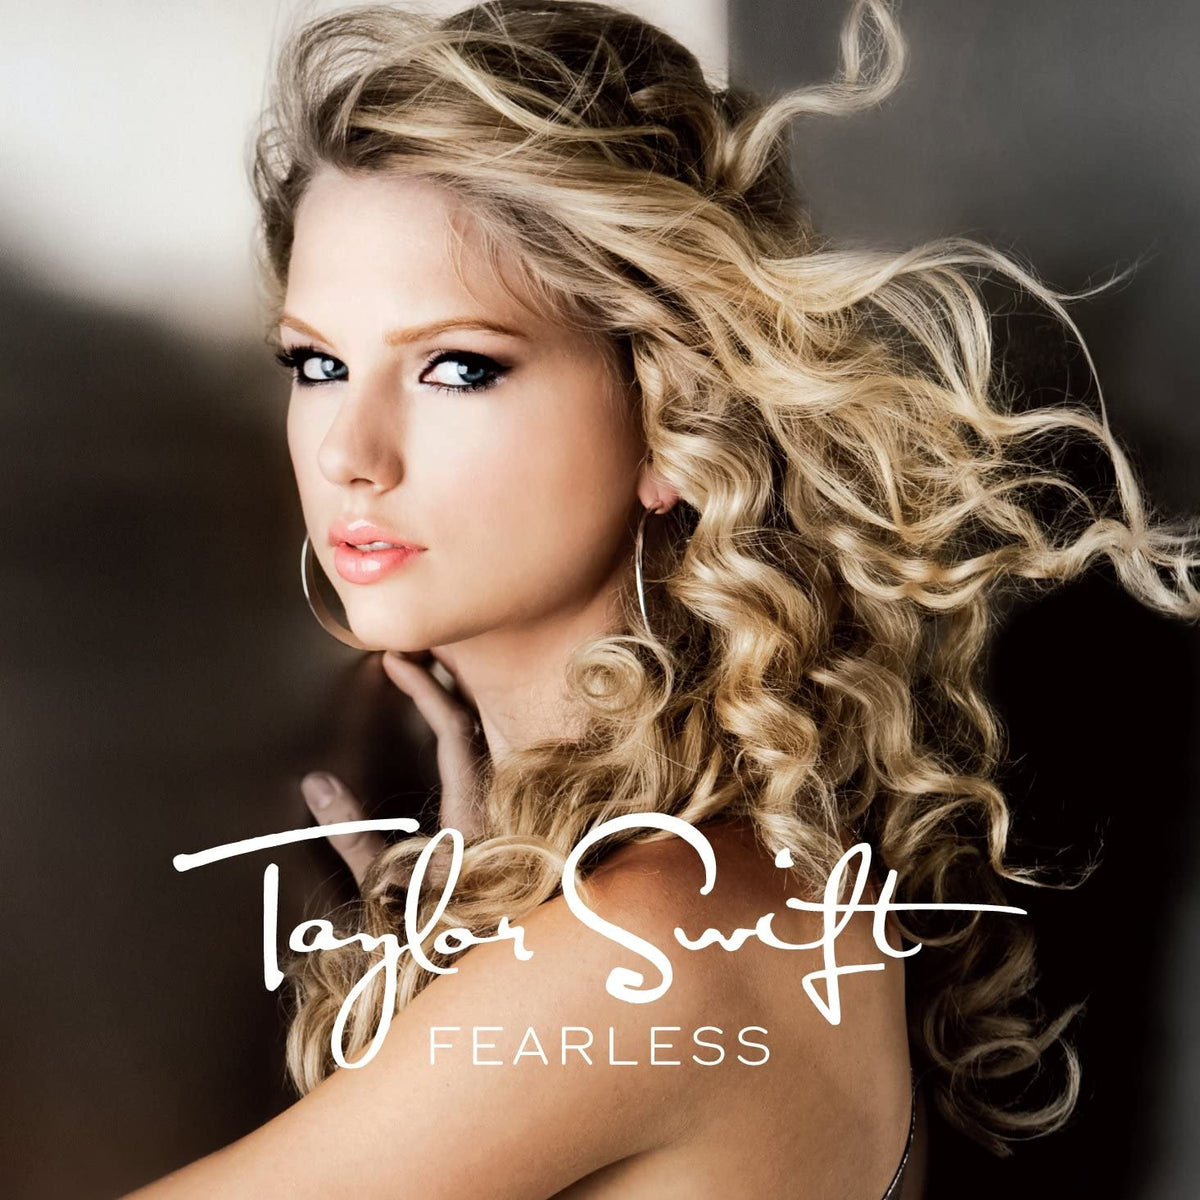 taylor swift fearless platinum edition vinilo - Buy LP vinyl records of  other Music Styles on todocoleccion